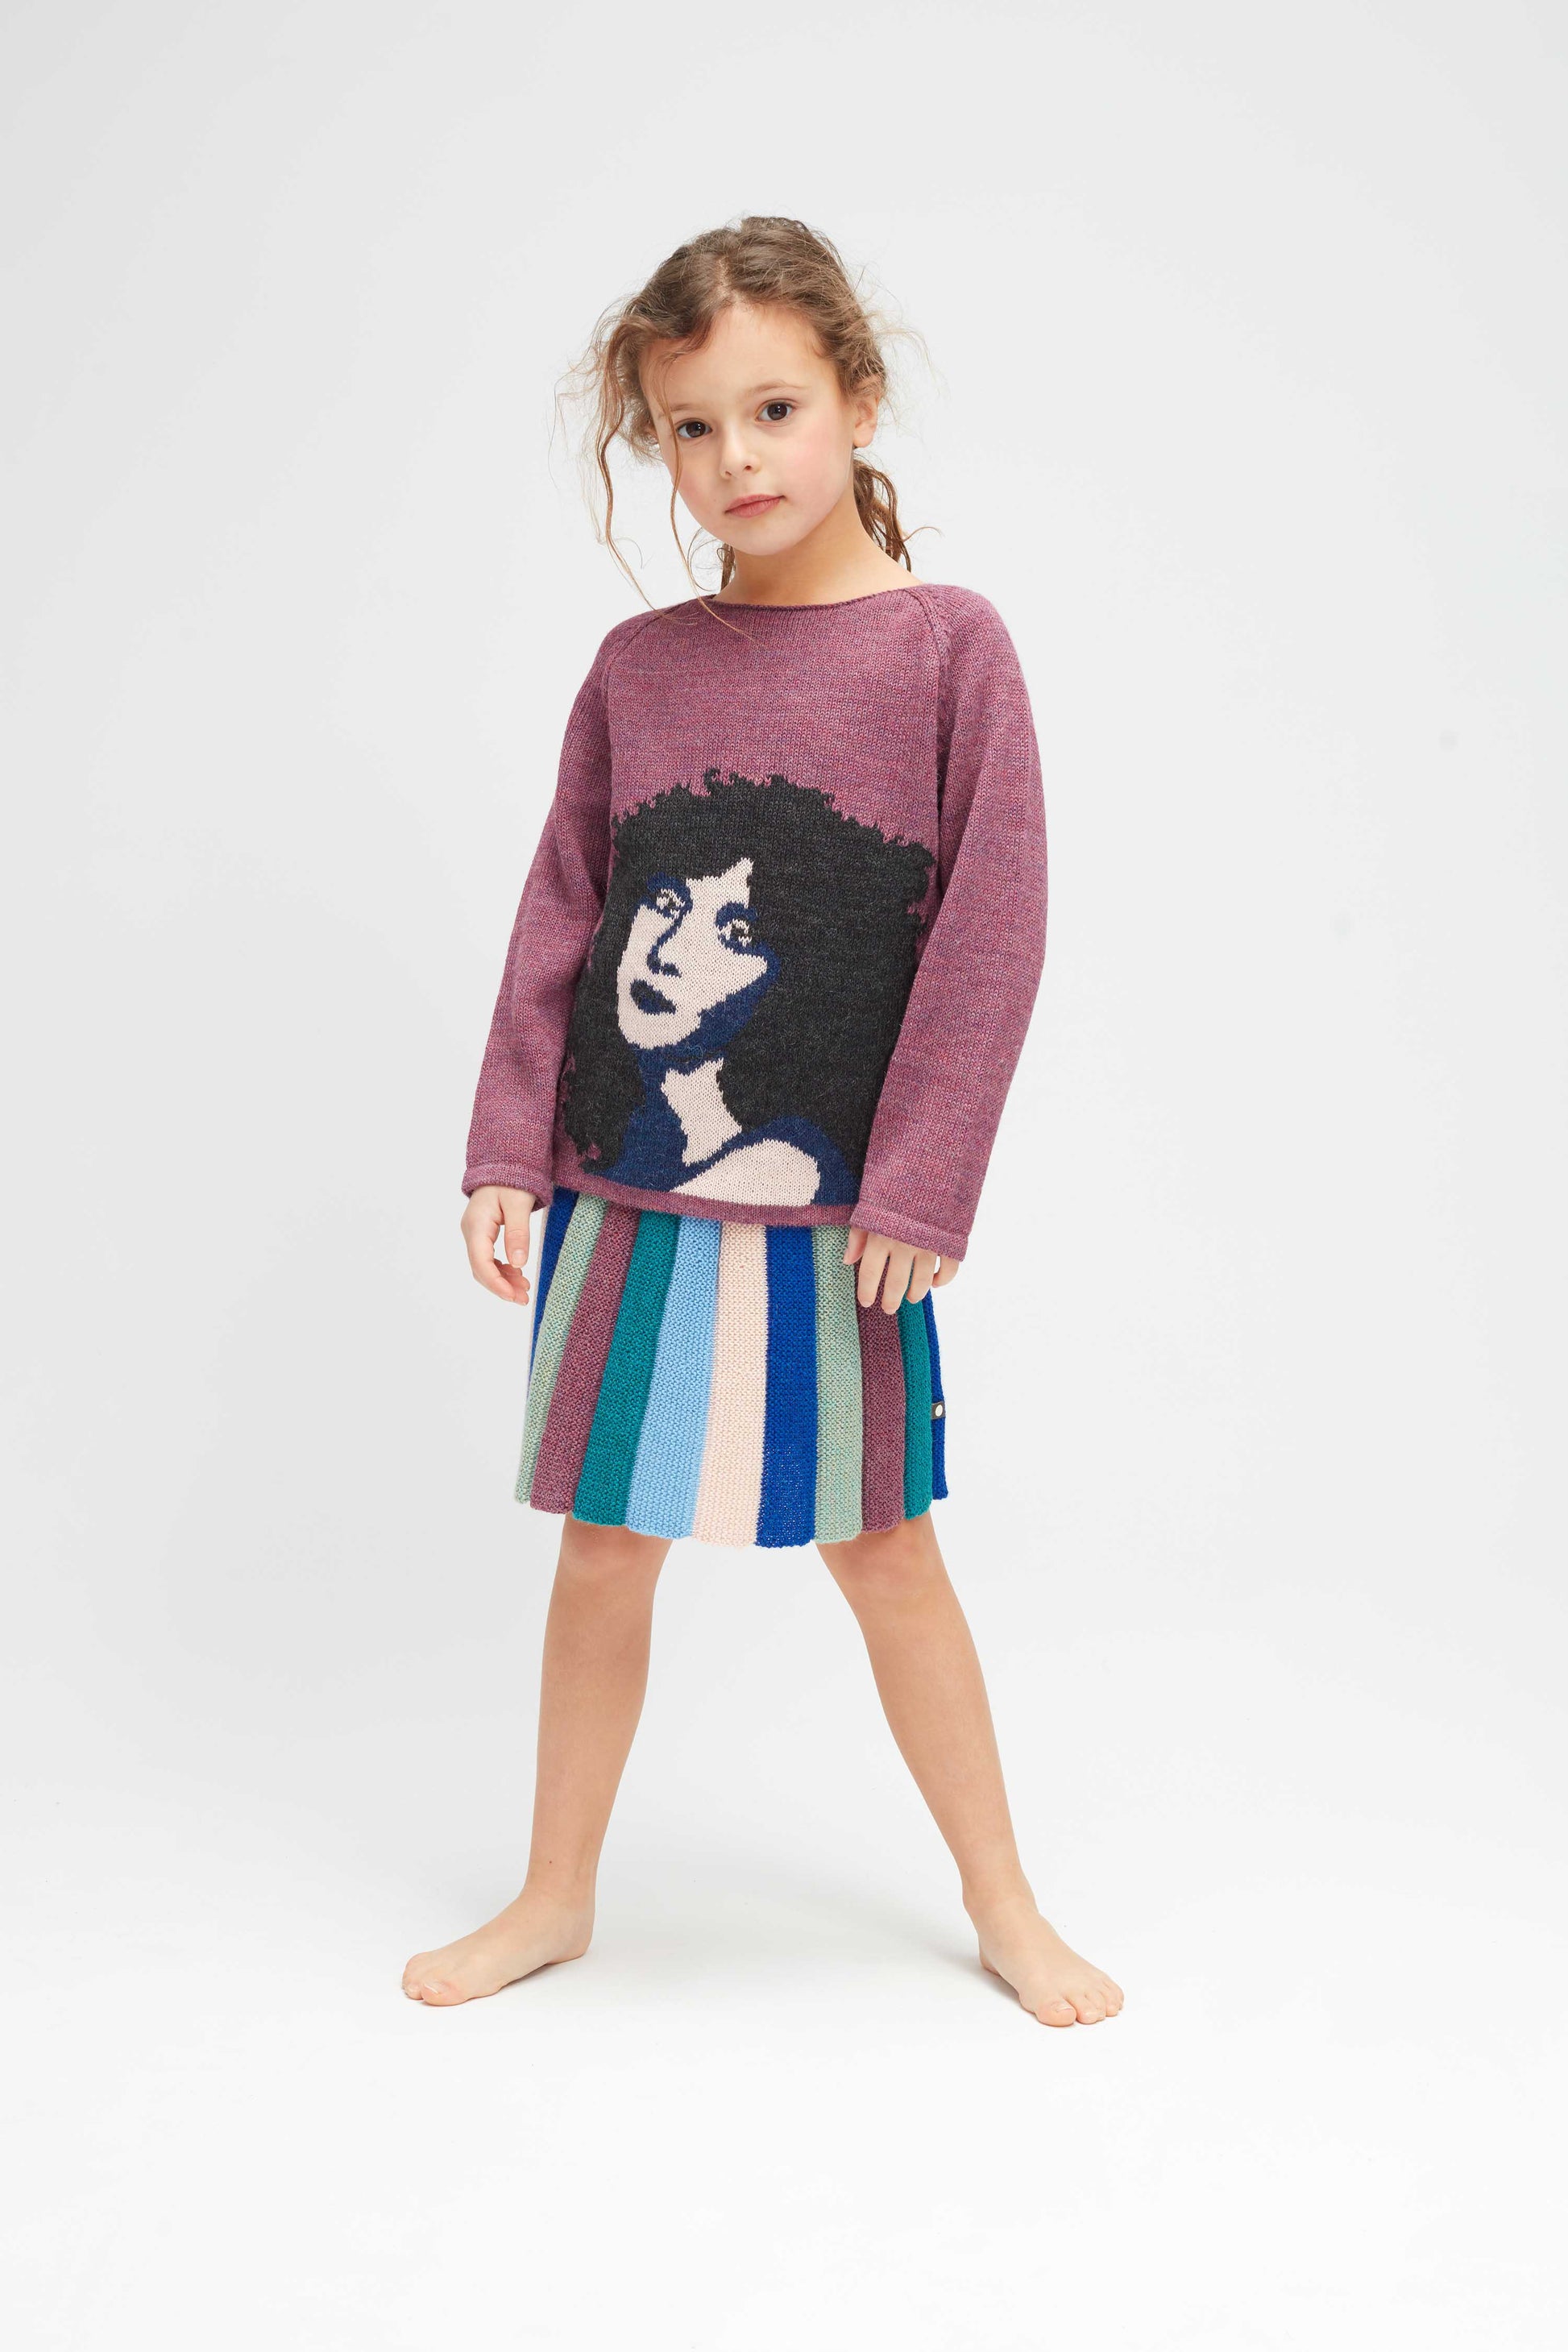 Oeuf Kids bottoms Everyday Skirt-Teal/Multi - Ever Simplicity